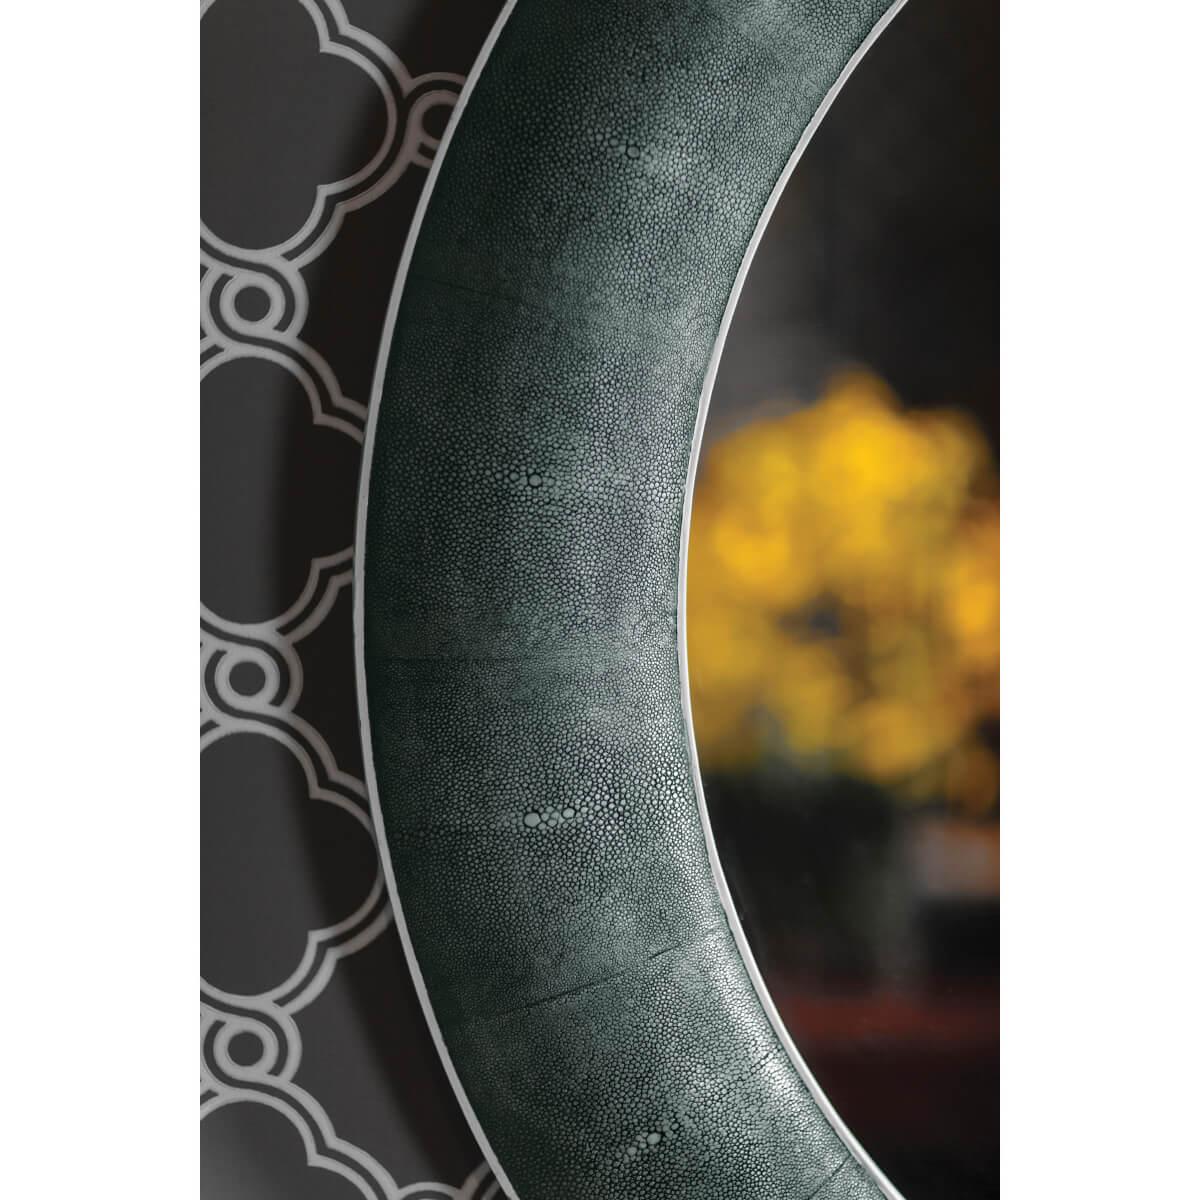 Large Art Deco style circular mirror with concave moulding veneered with faux shagreen and with a black rub-through faded finish. Plain mirrored glass.

Dimensions: 45.5